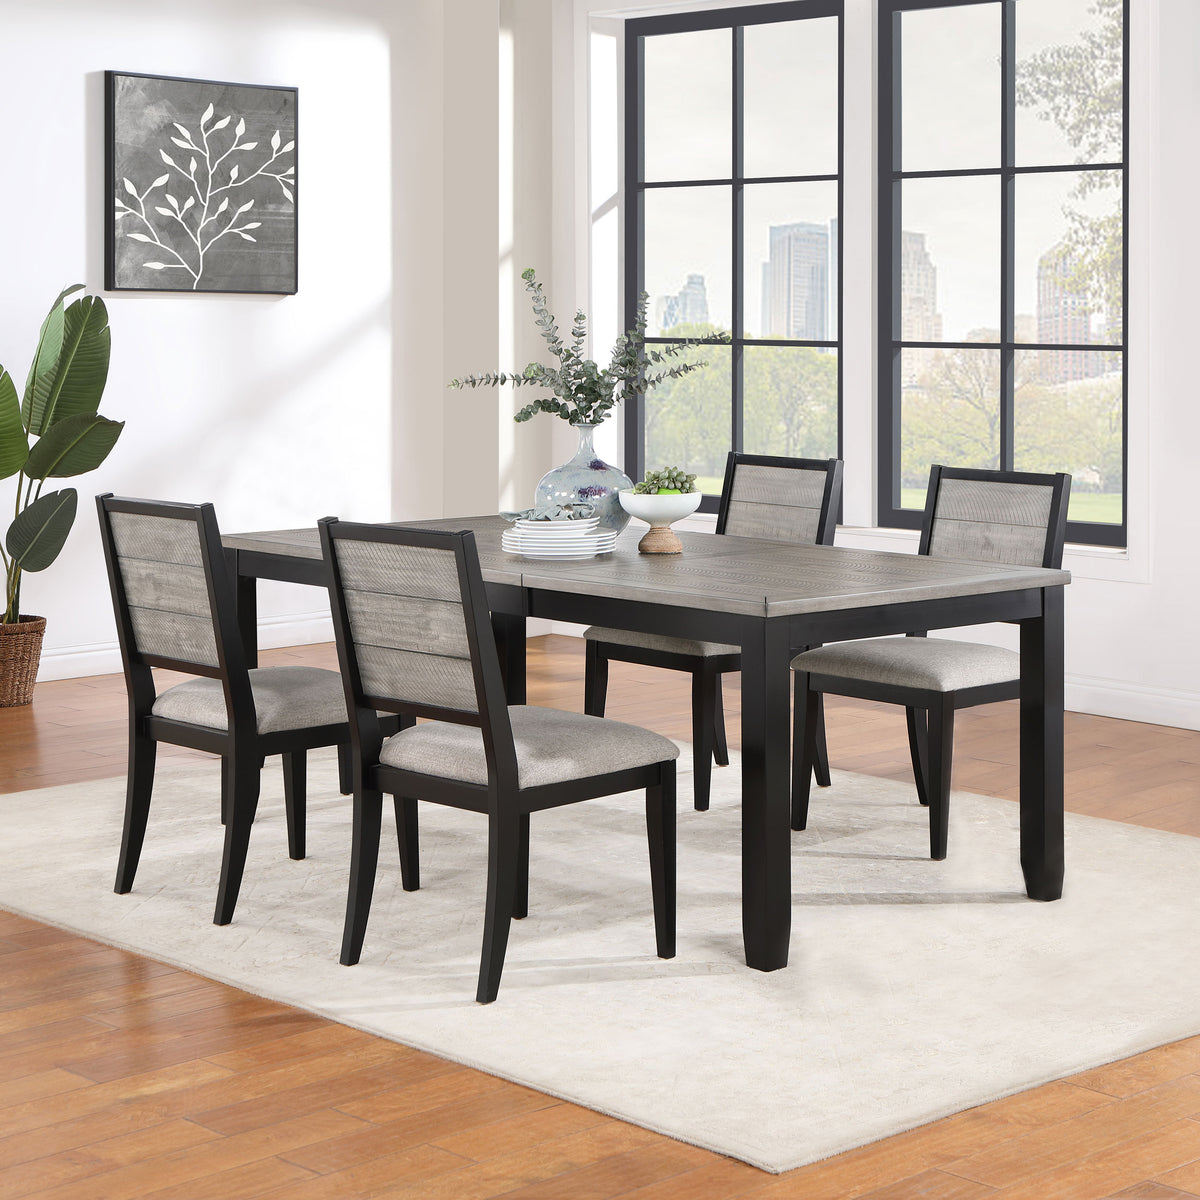 Elodie Dining Table Set with Extension Leaf  Half Price Furniture